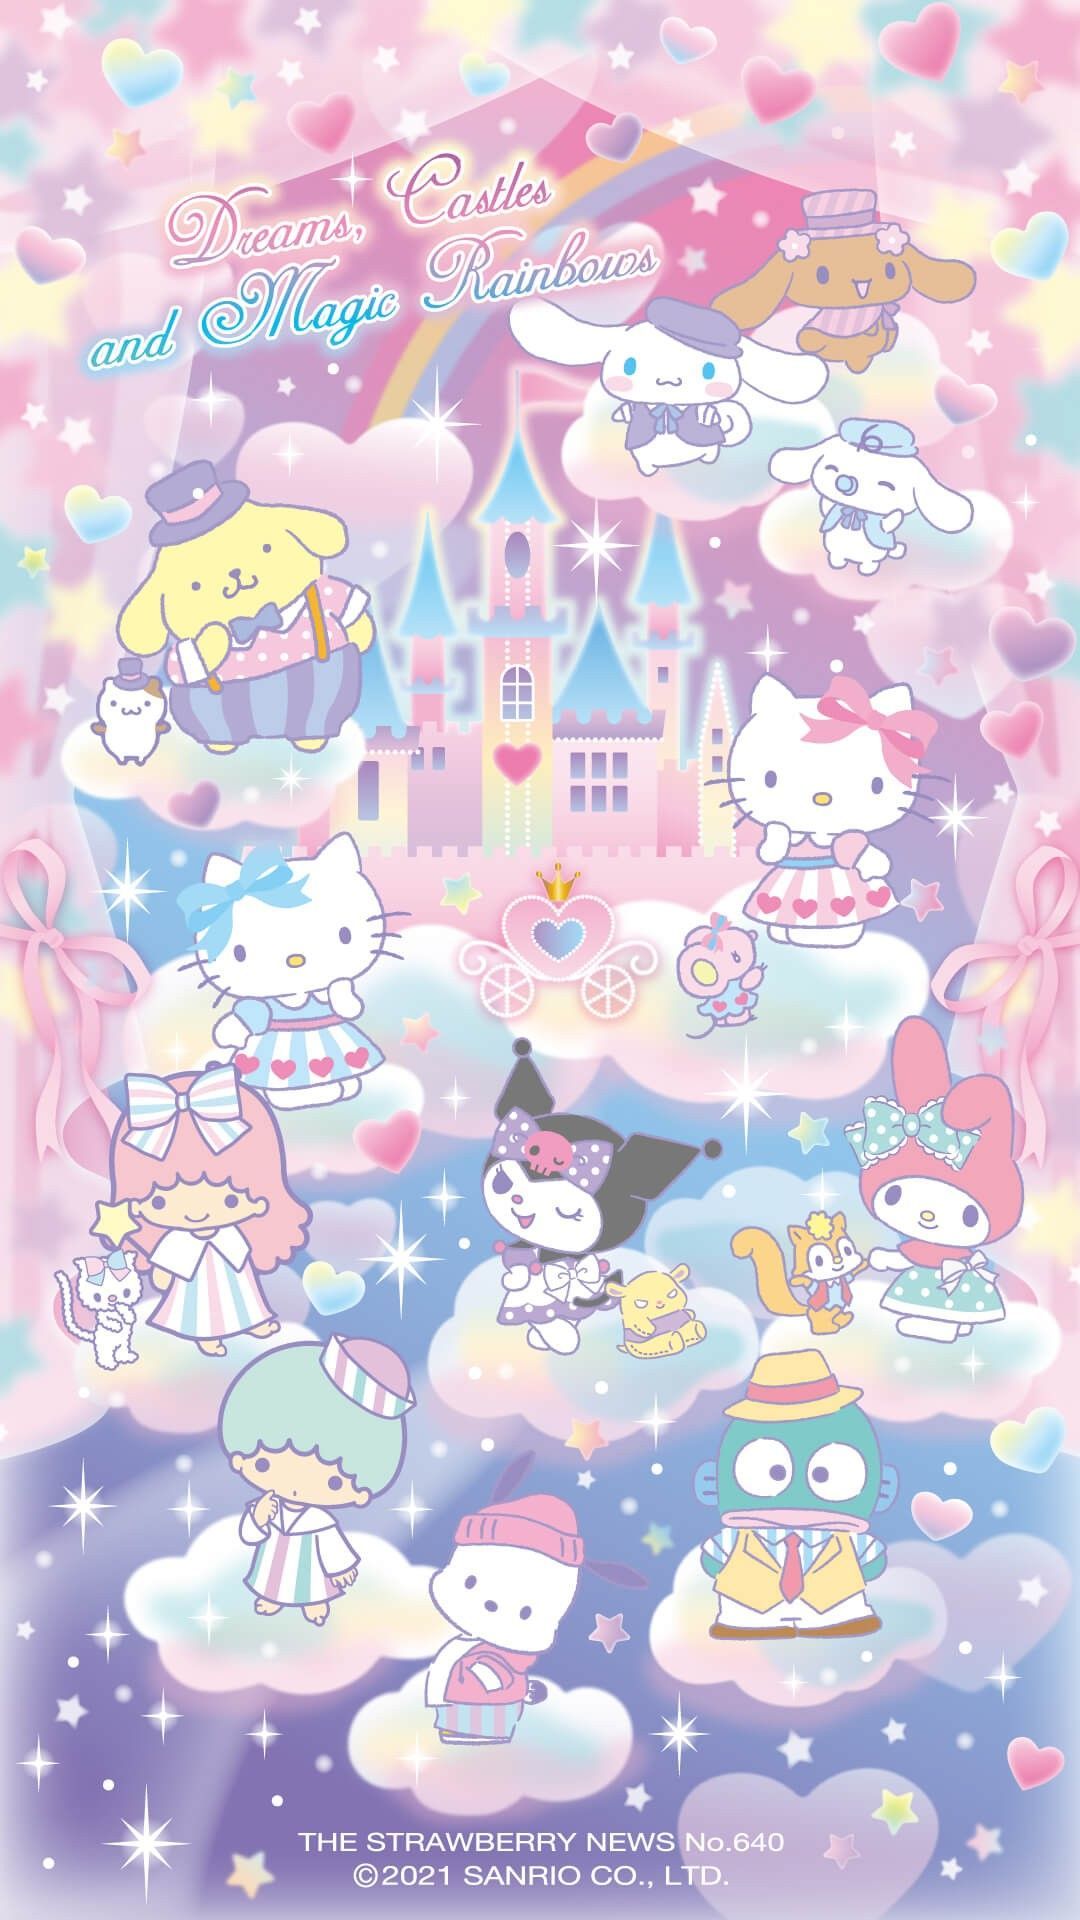 IPhone wallpaper with Sanrio characters in a dreamy scene - Sanrio